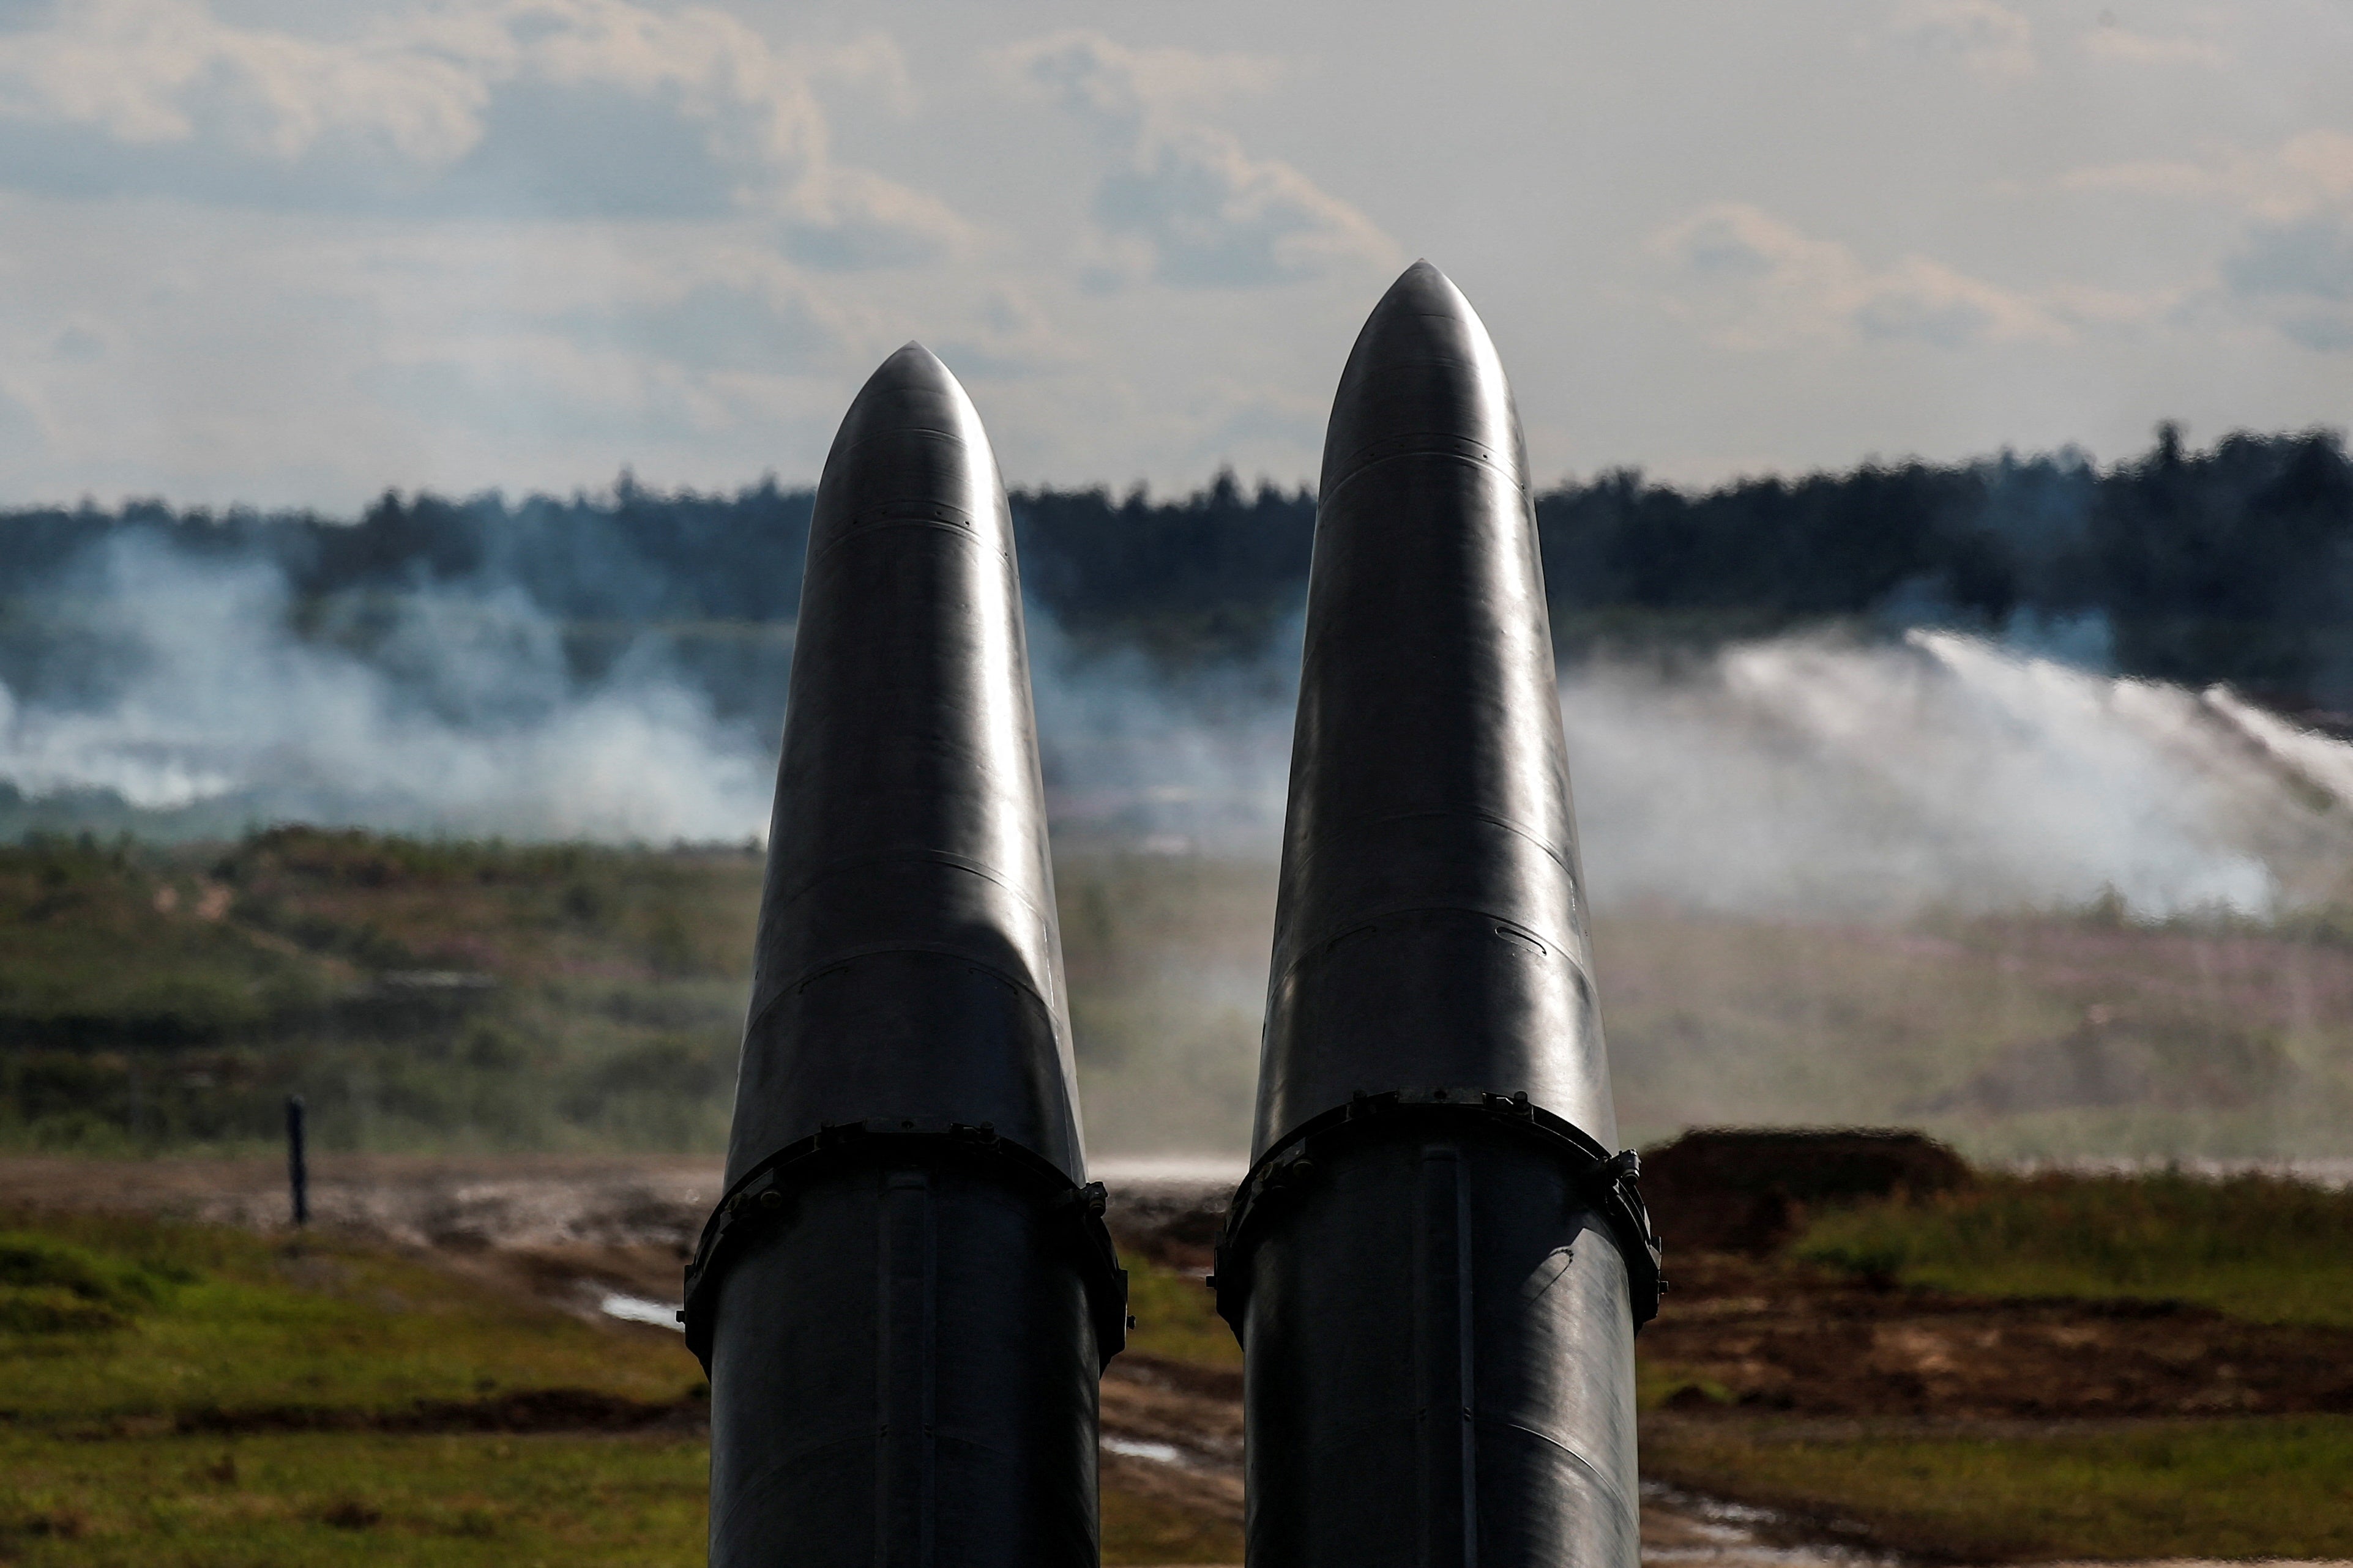 9М723 missiles, part of Iskander-M missile complex, are seen during a demonstration at the International military-technical forum ARMY-2019